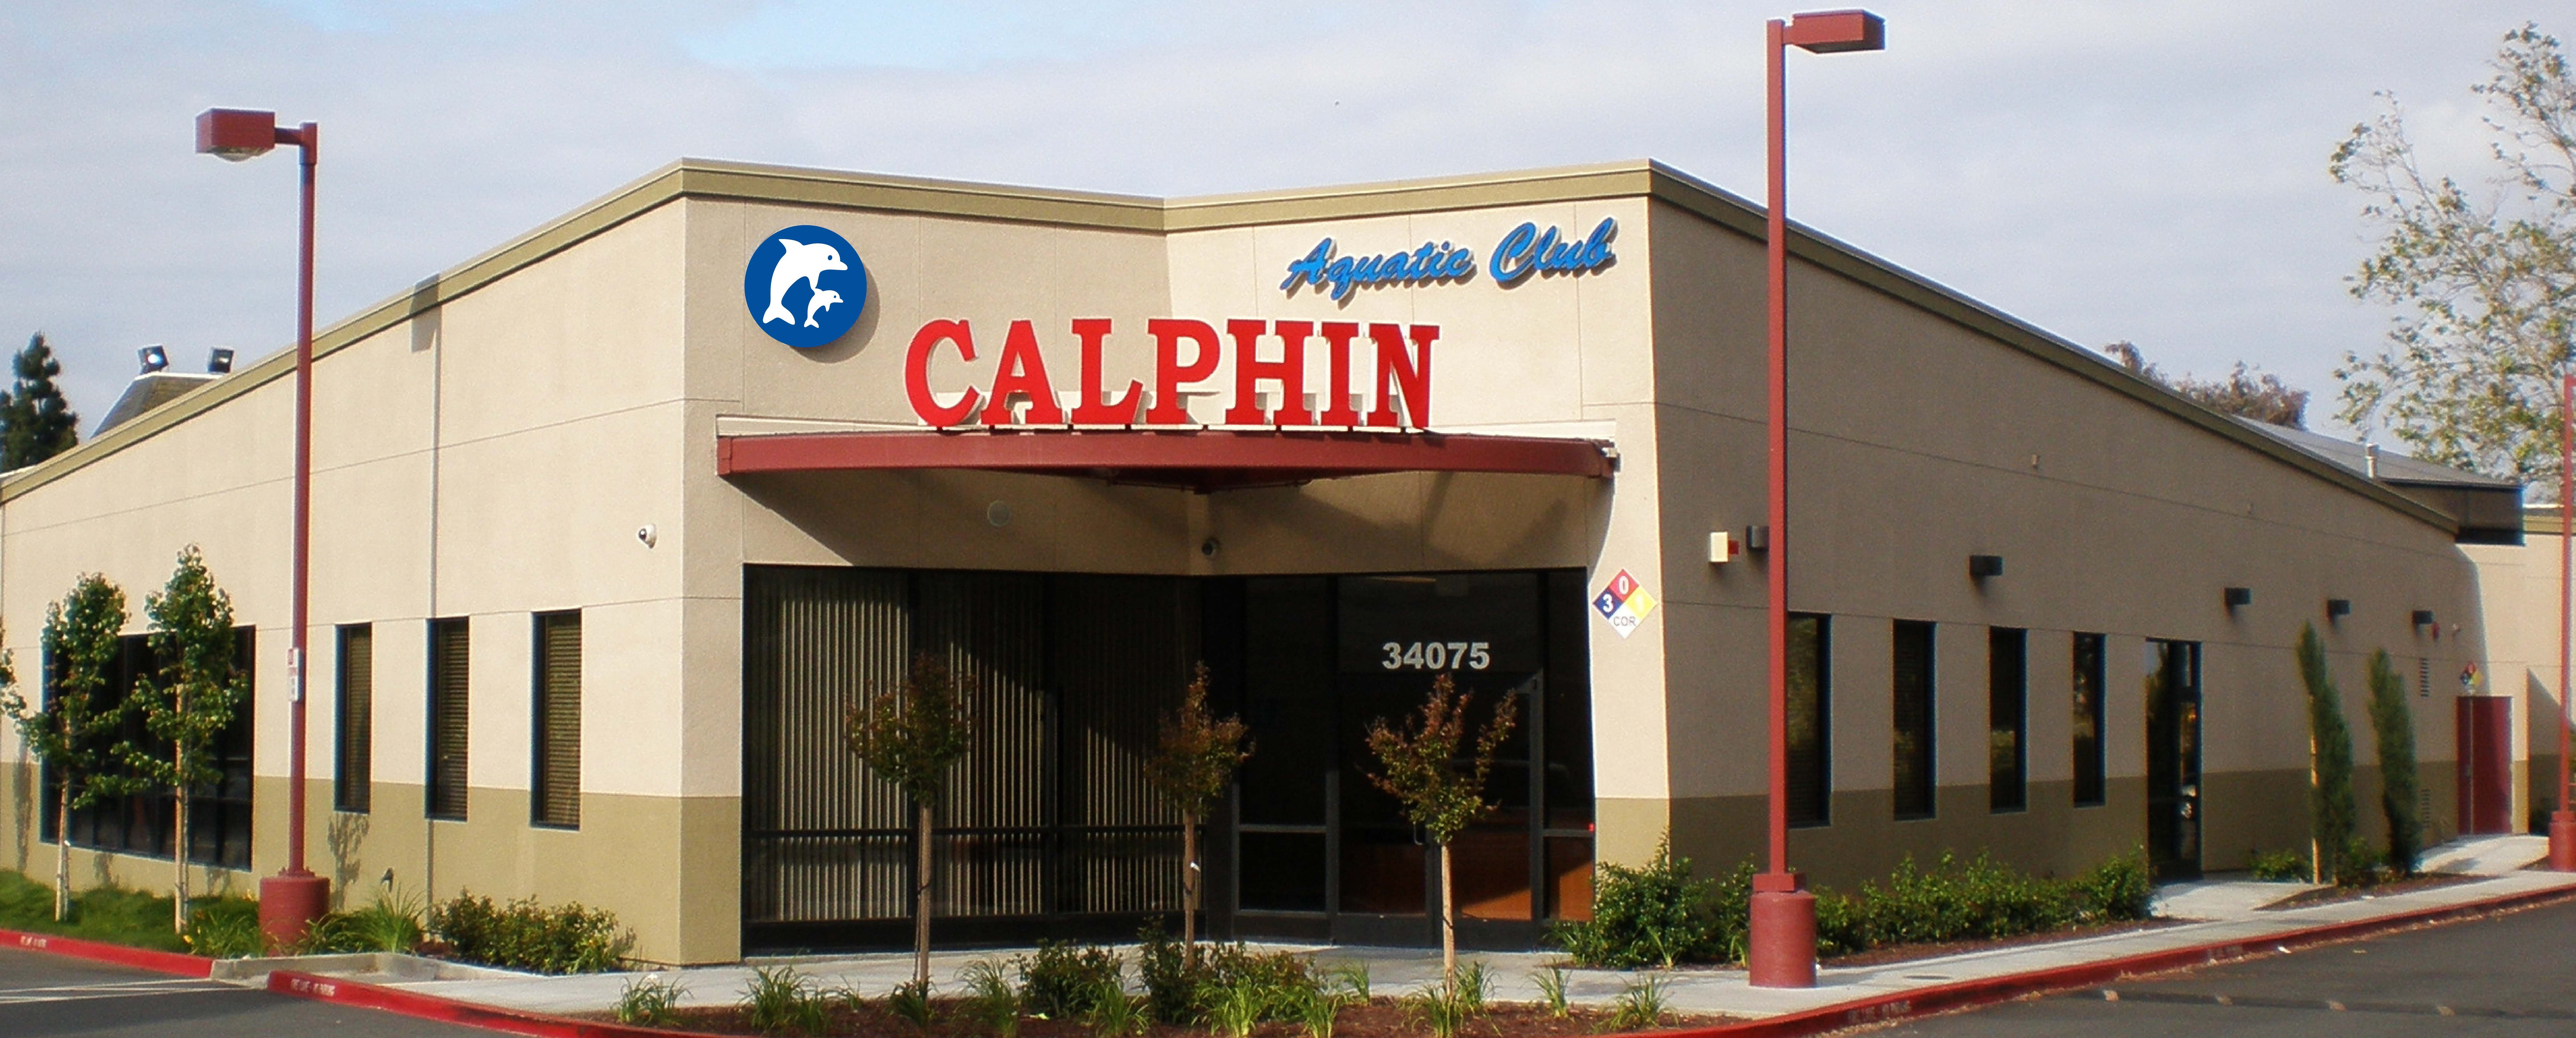 This picture shows Calphin Swim Academy in Fremont, California